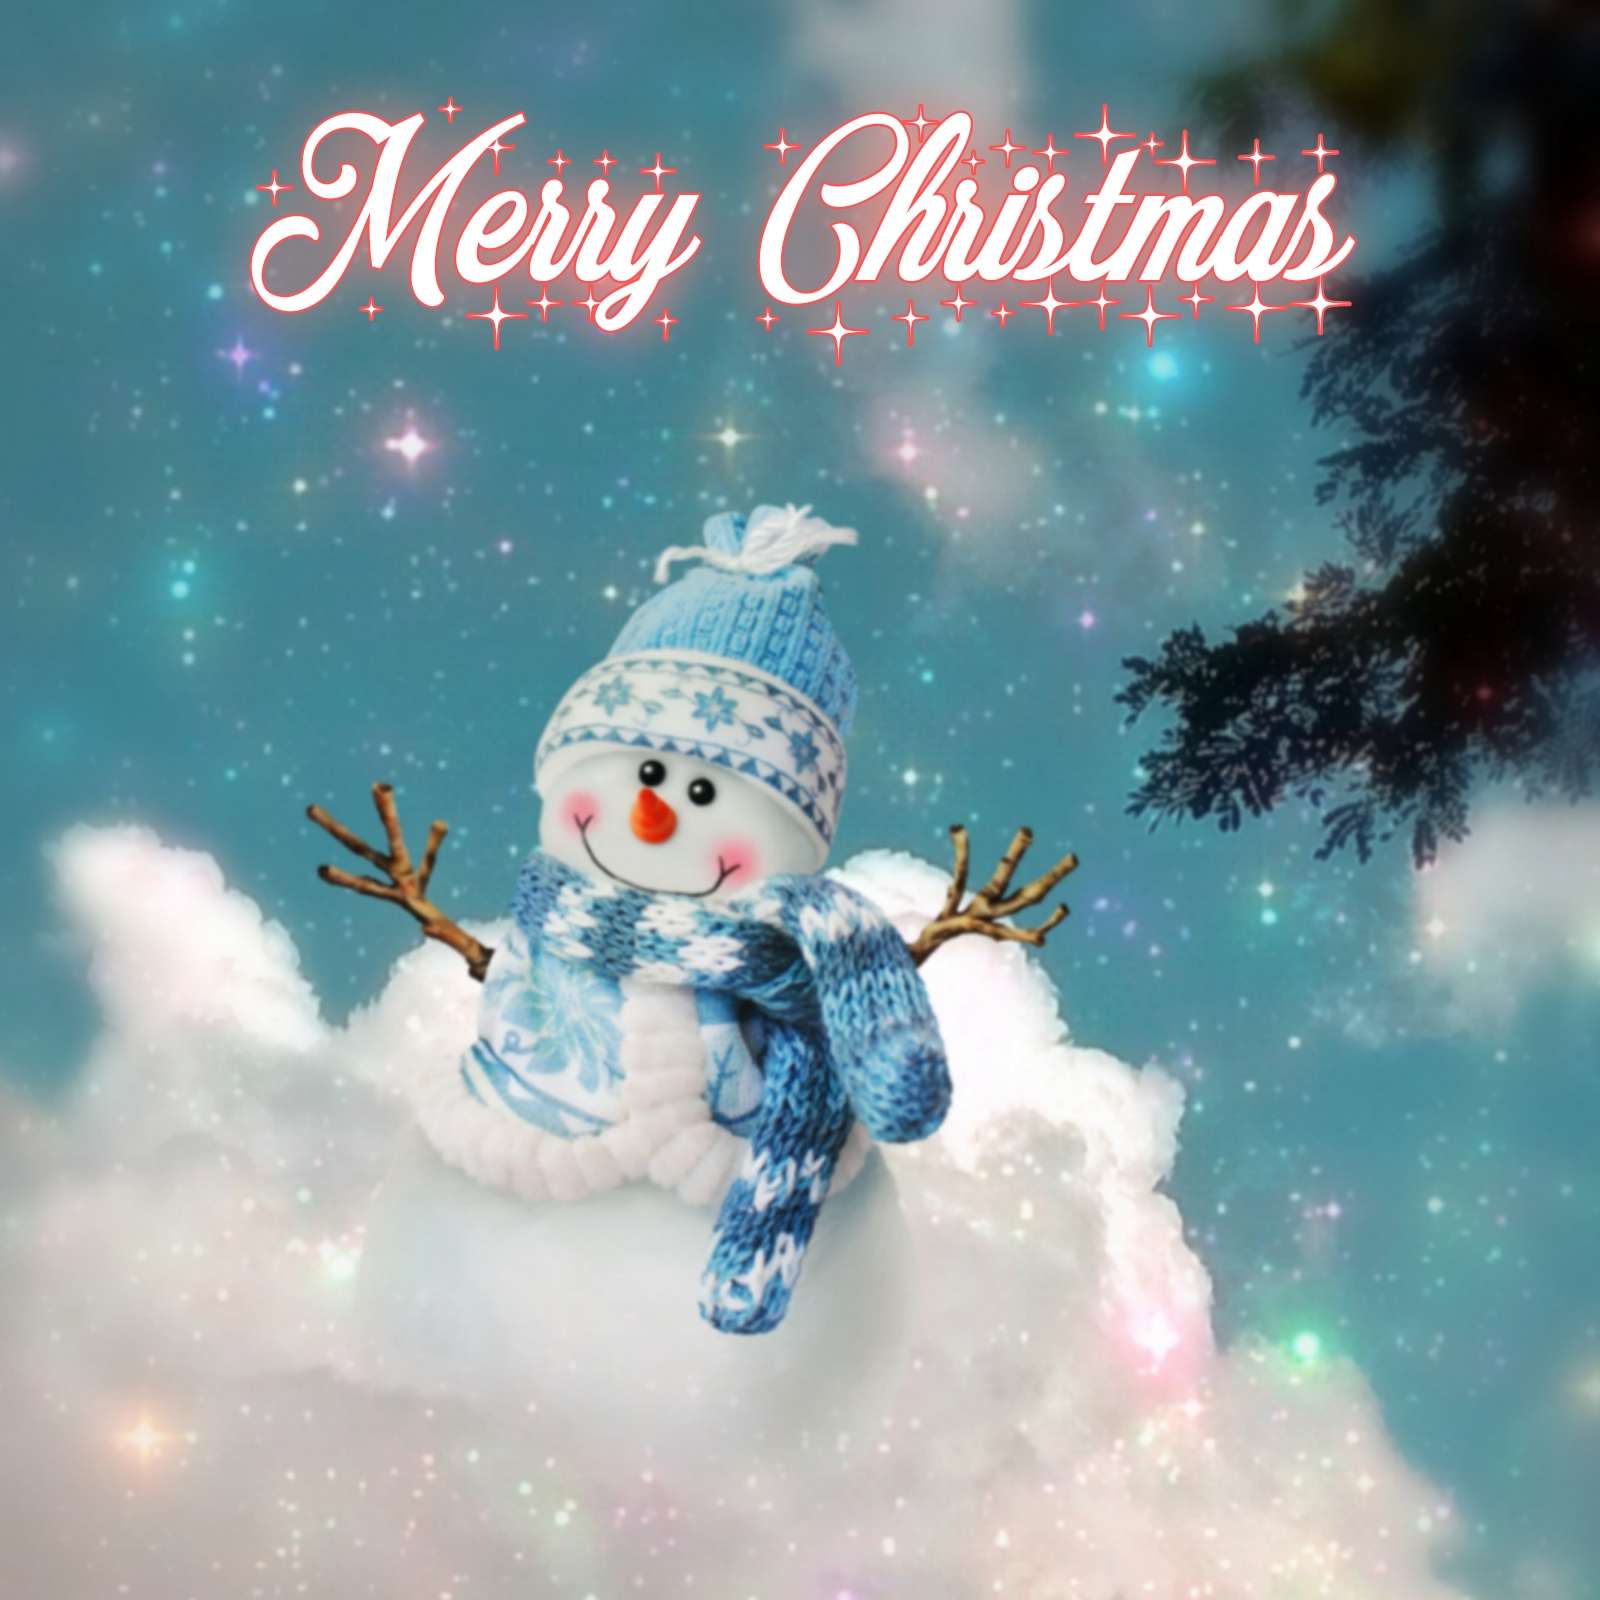 Merry Christmas Images 2021 Download